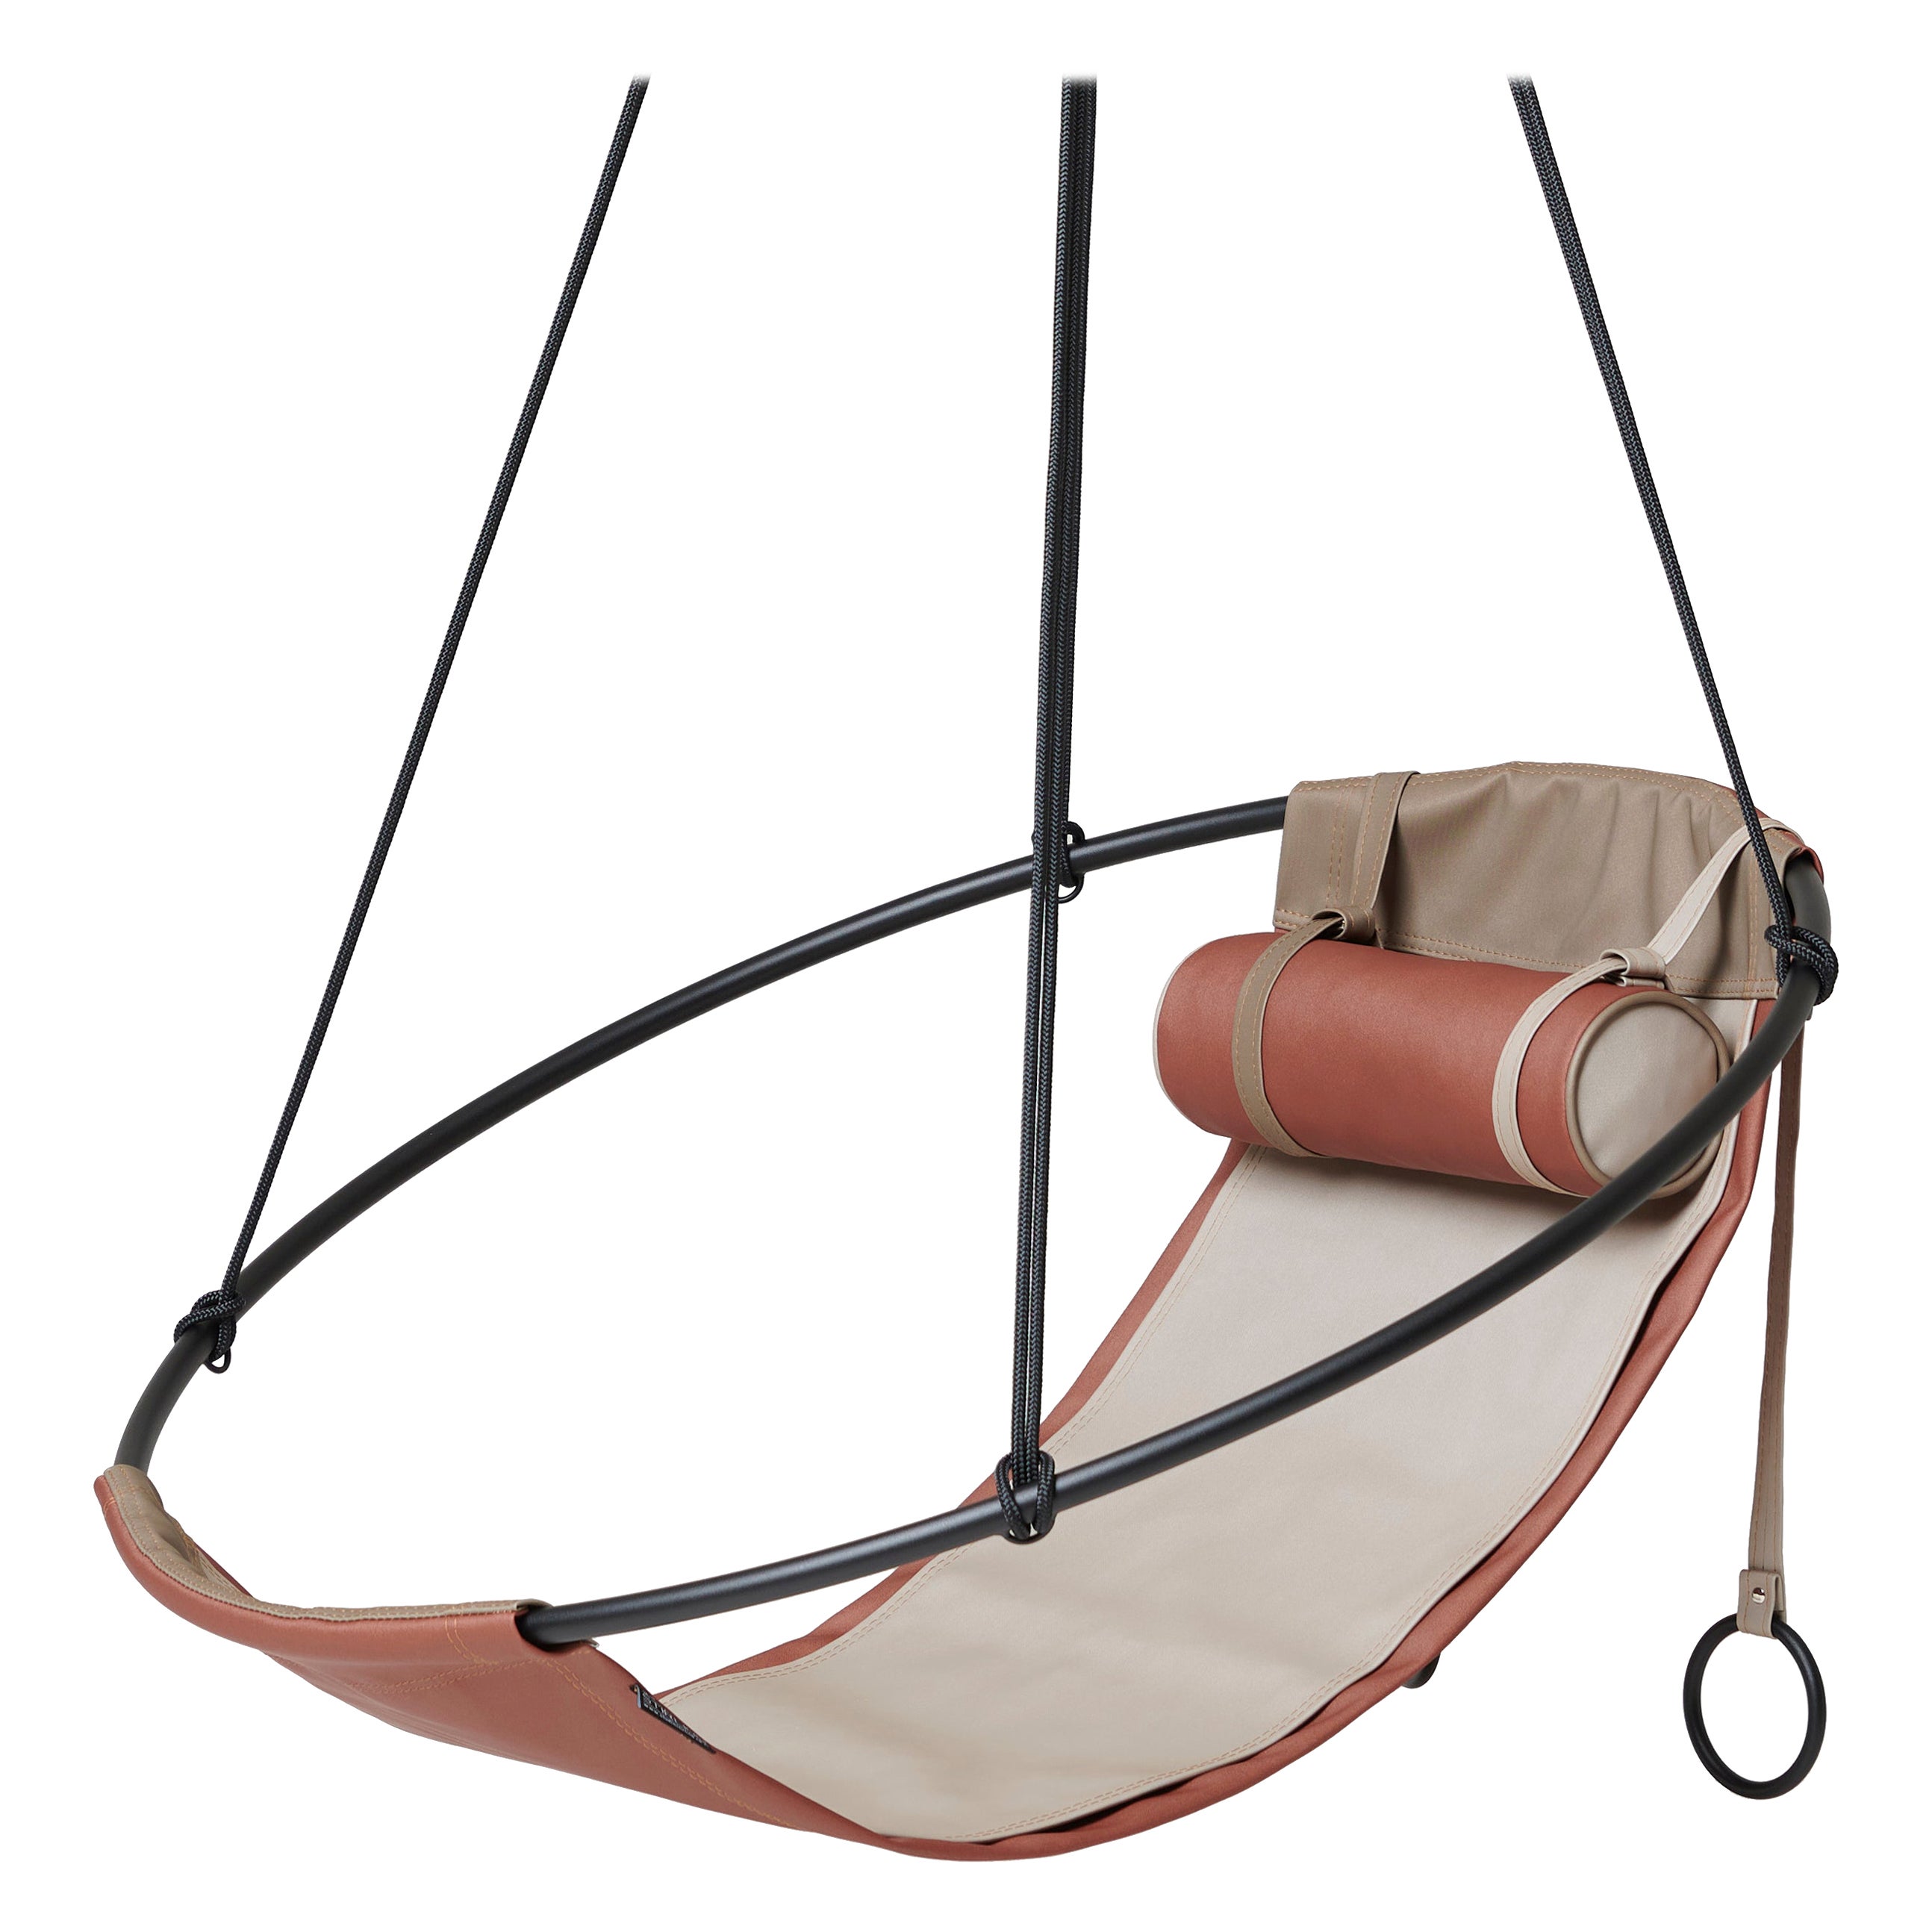 Modern Sling Hanging Chair, Outdoor Sandy Colour, Vegan and Eco Friendly